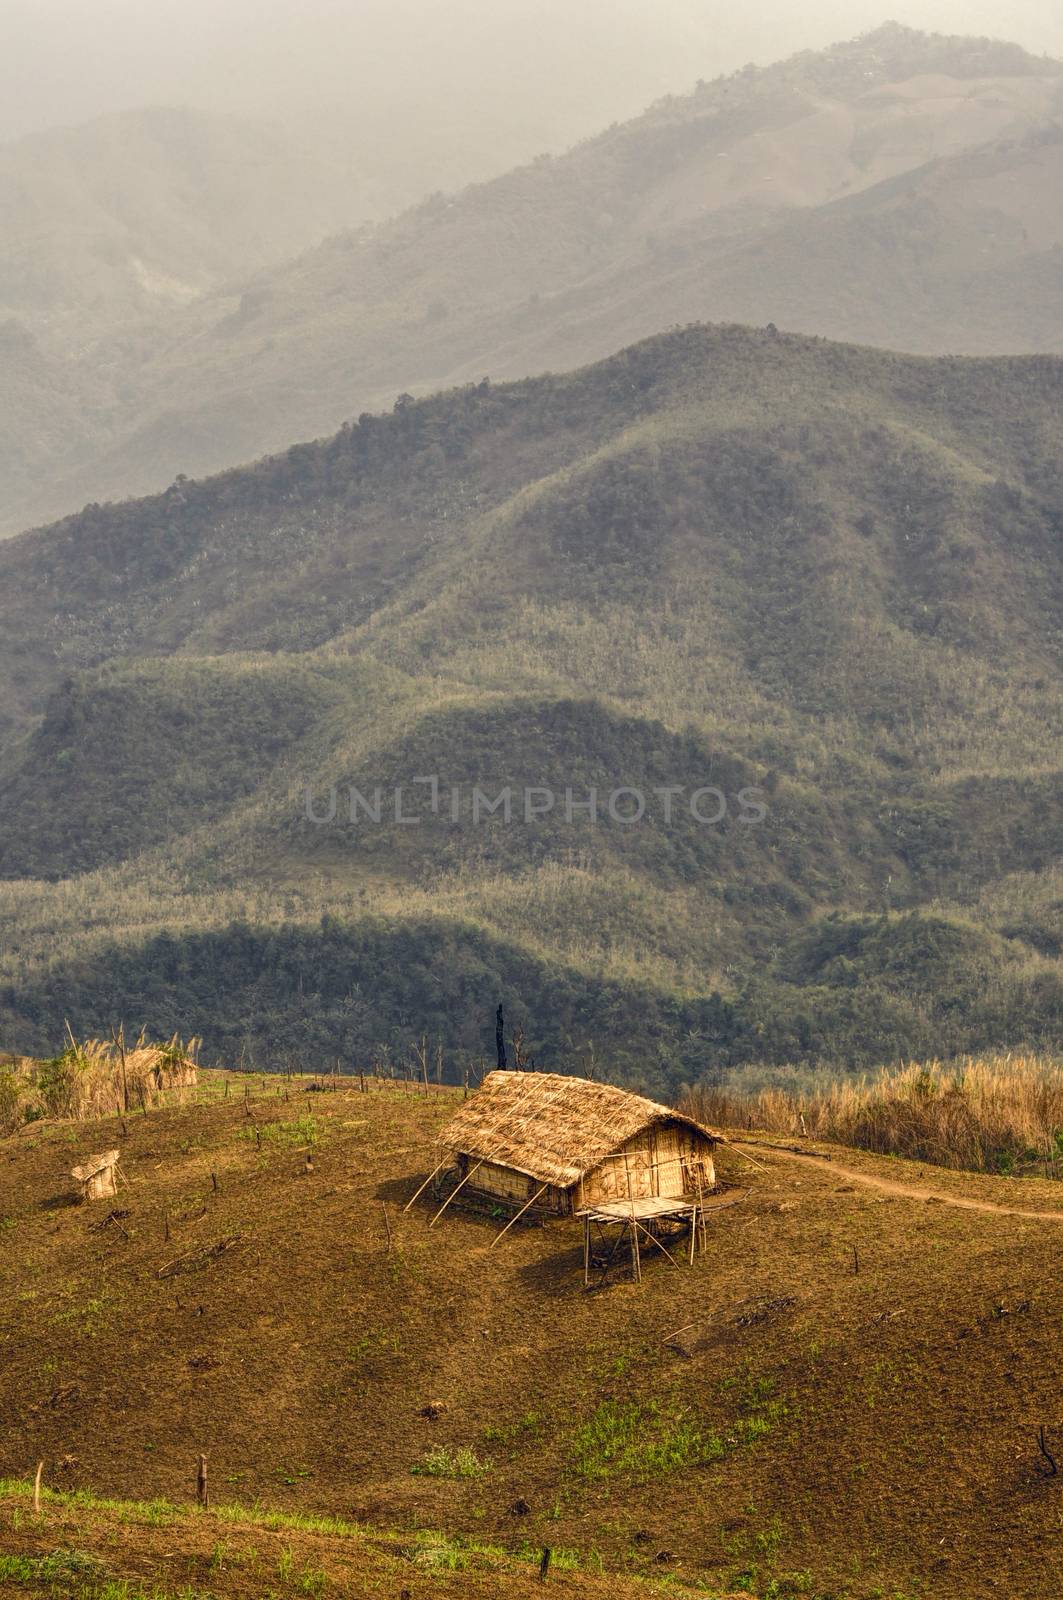 Settlement in Nagaland, India by MichalKnitl